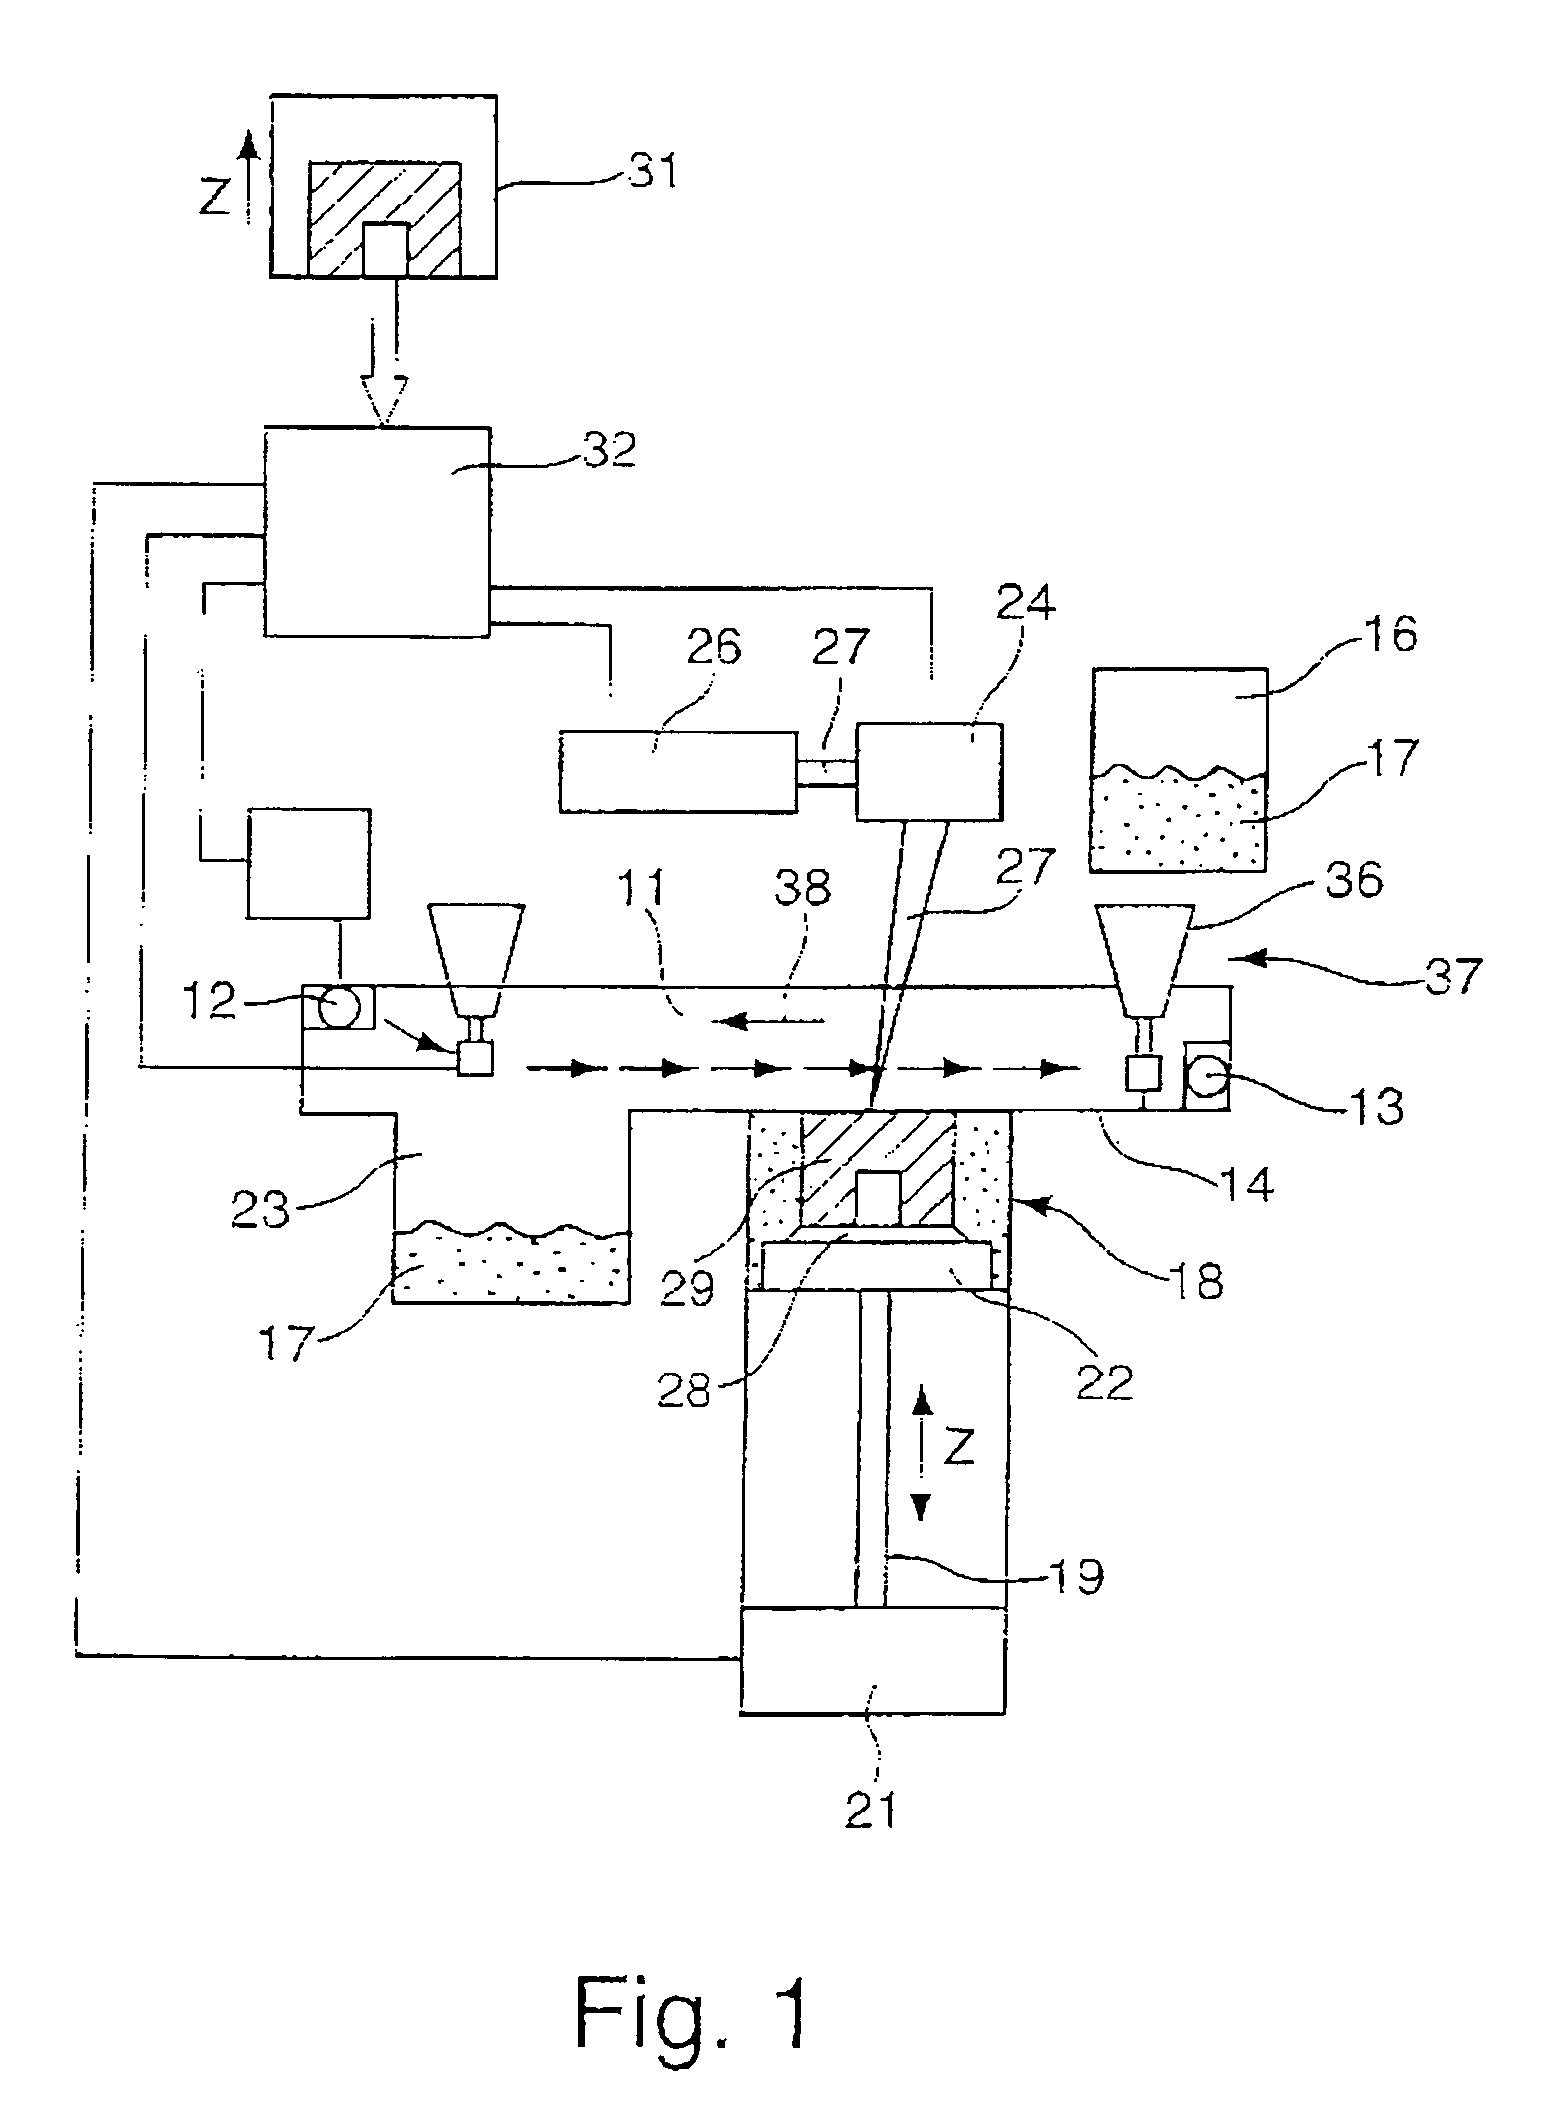 Method for the manufacture of a molding as well as a sensor unit for the application thereof